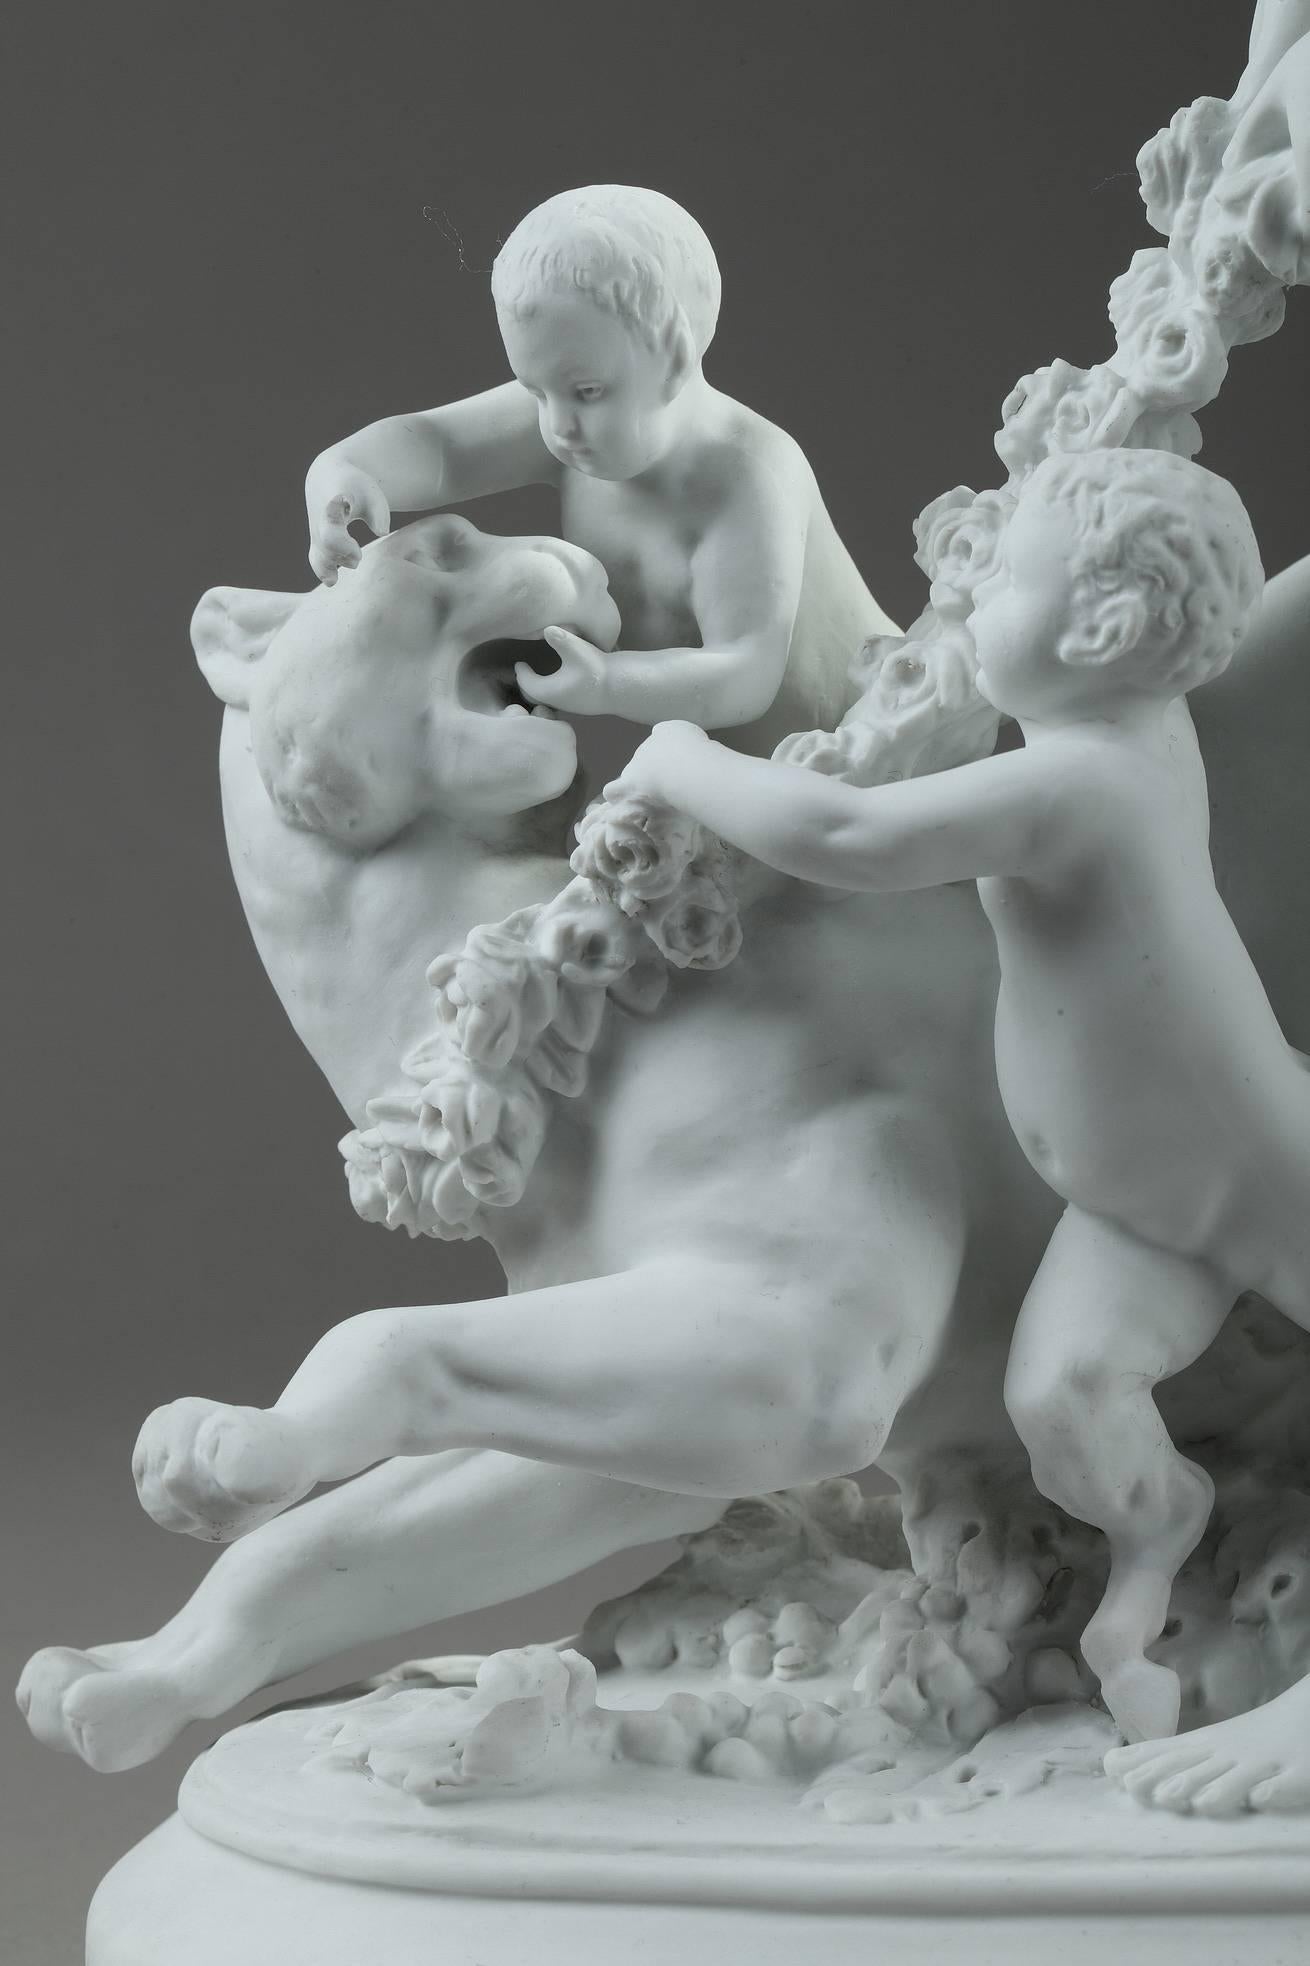 19th century mythological group in porcelain biscuit featuring Diana holding a lioness, after the French sculptor Albert-Ernest Carrier-Belleuse (1824-1887). In Roman mythology, Diana was the goddess of the hunt, the moon and nature being associated